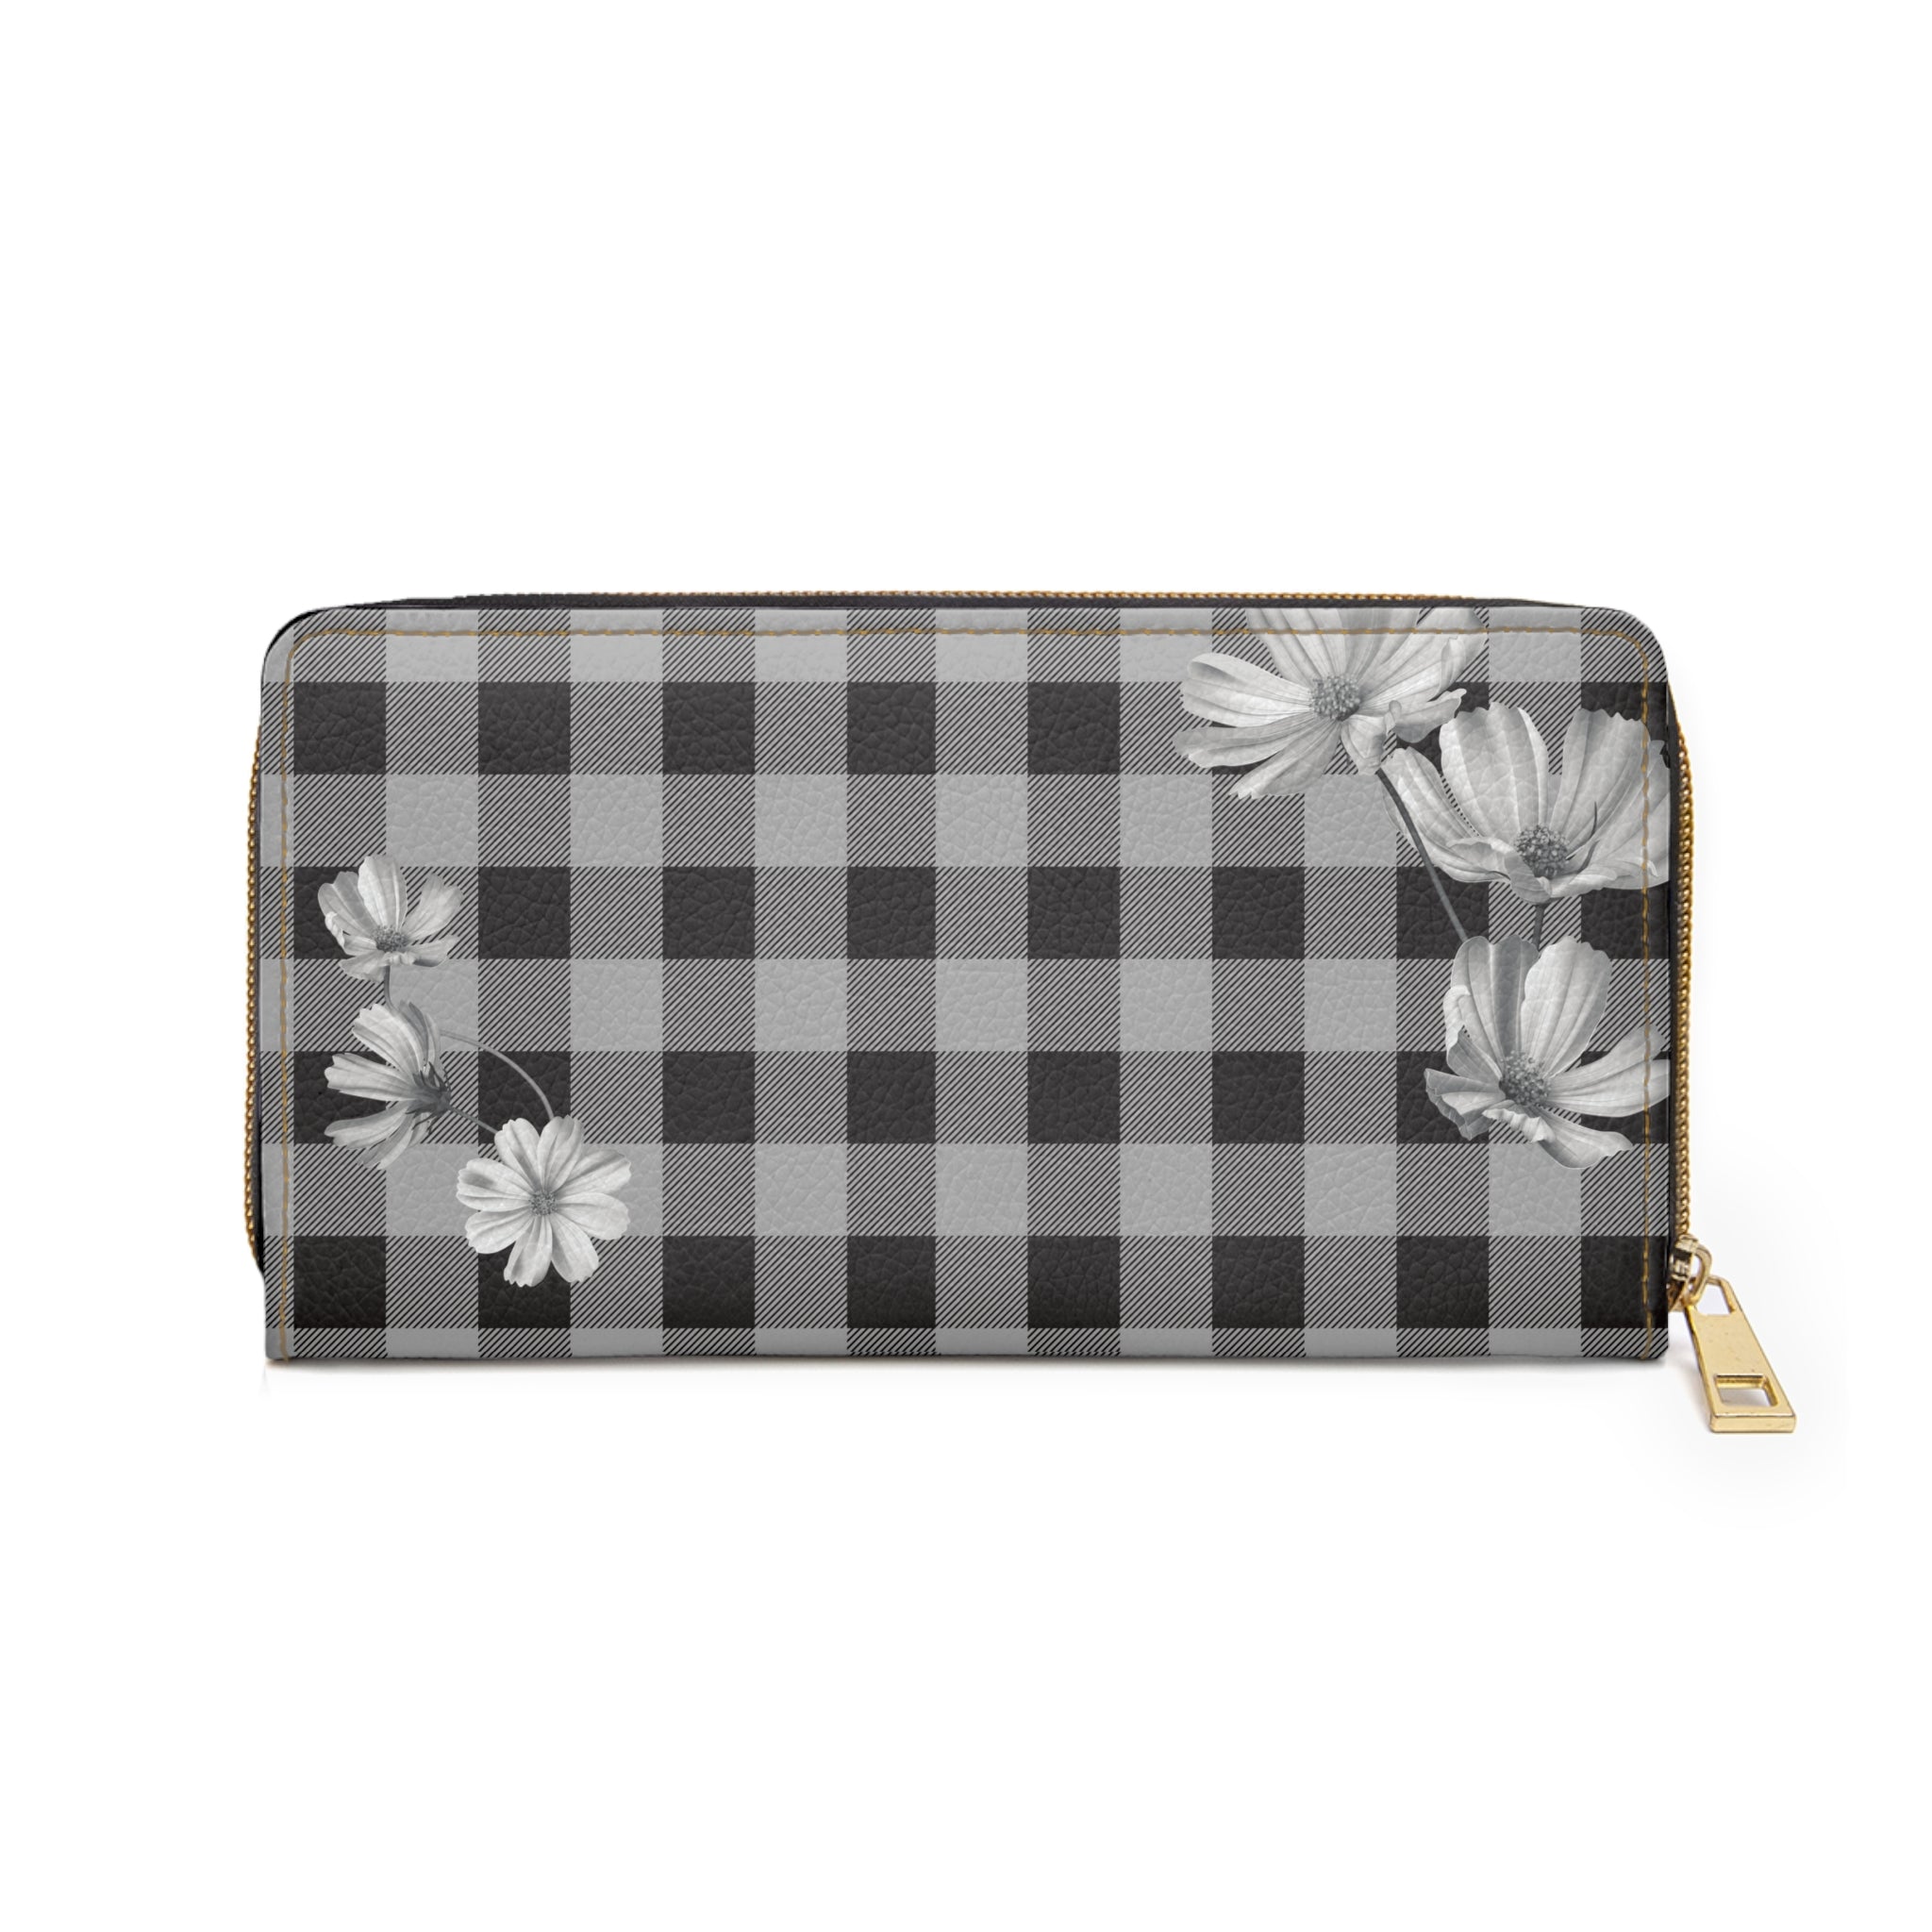 Check Mate in Grey (Flower) Ladies Wallet, Zipper Pouch, Coin Purse, Zippered Wallet, Cute Purse